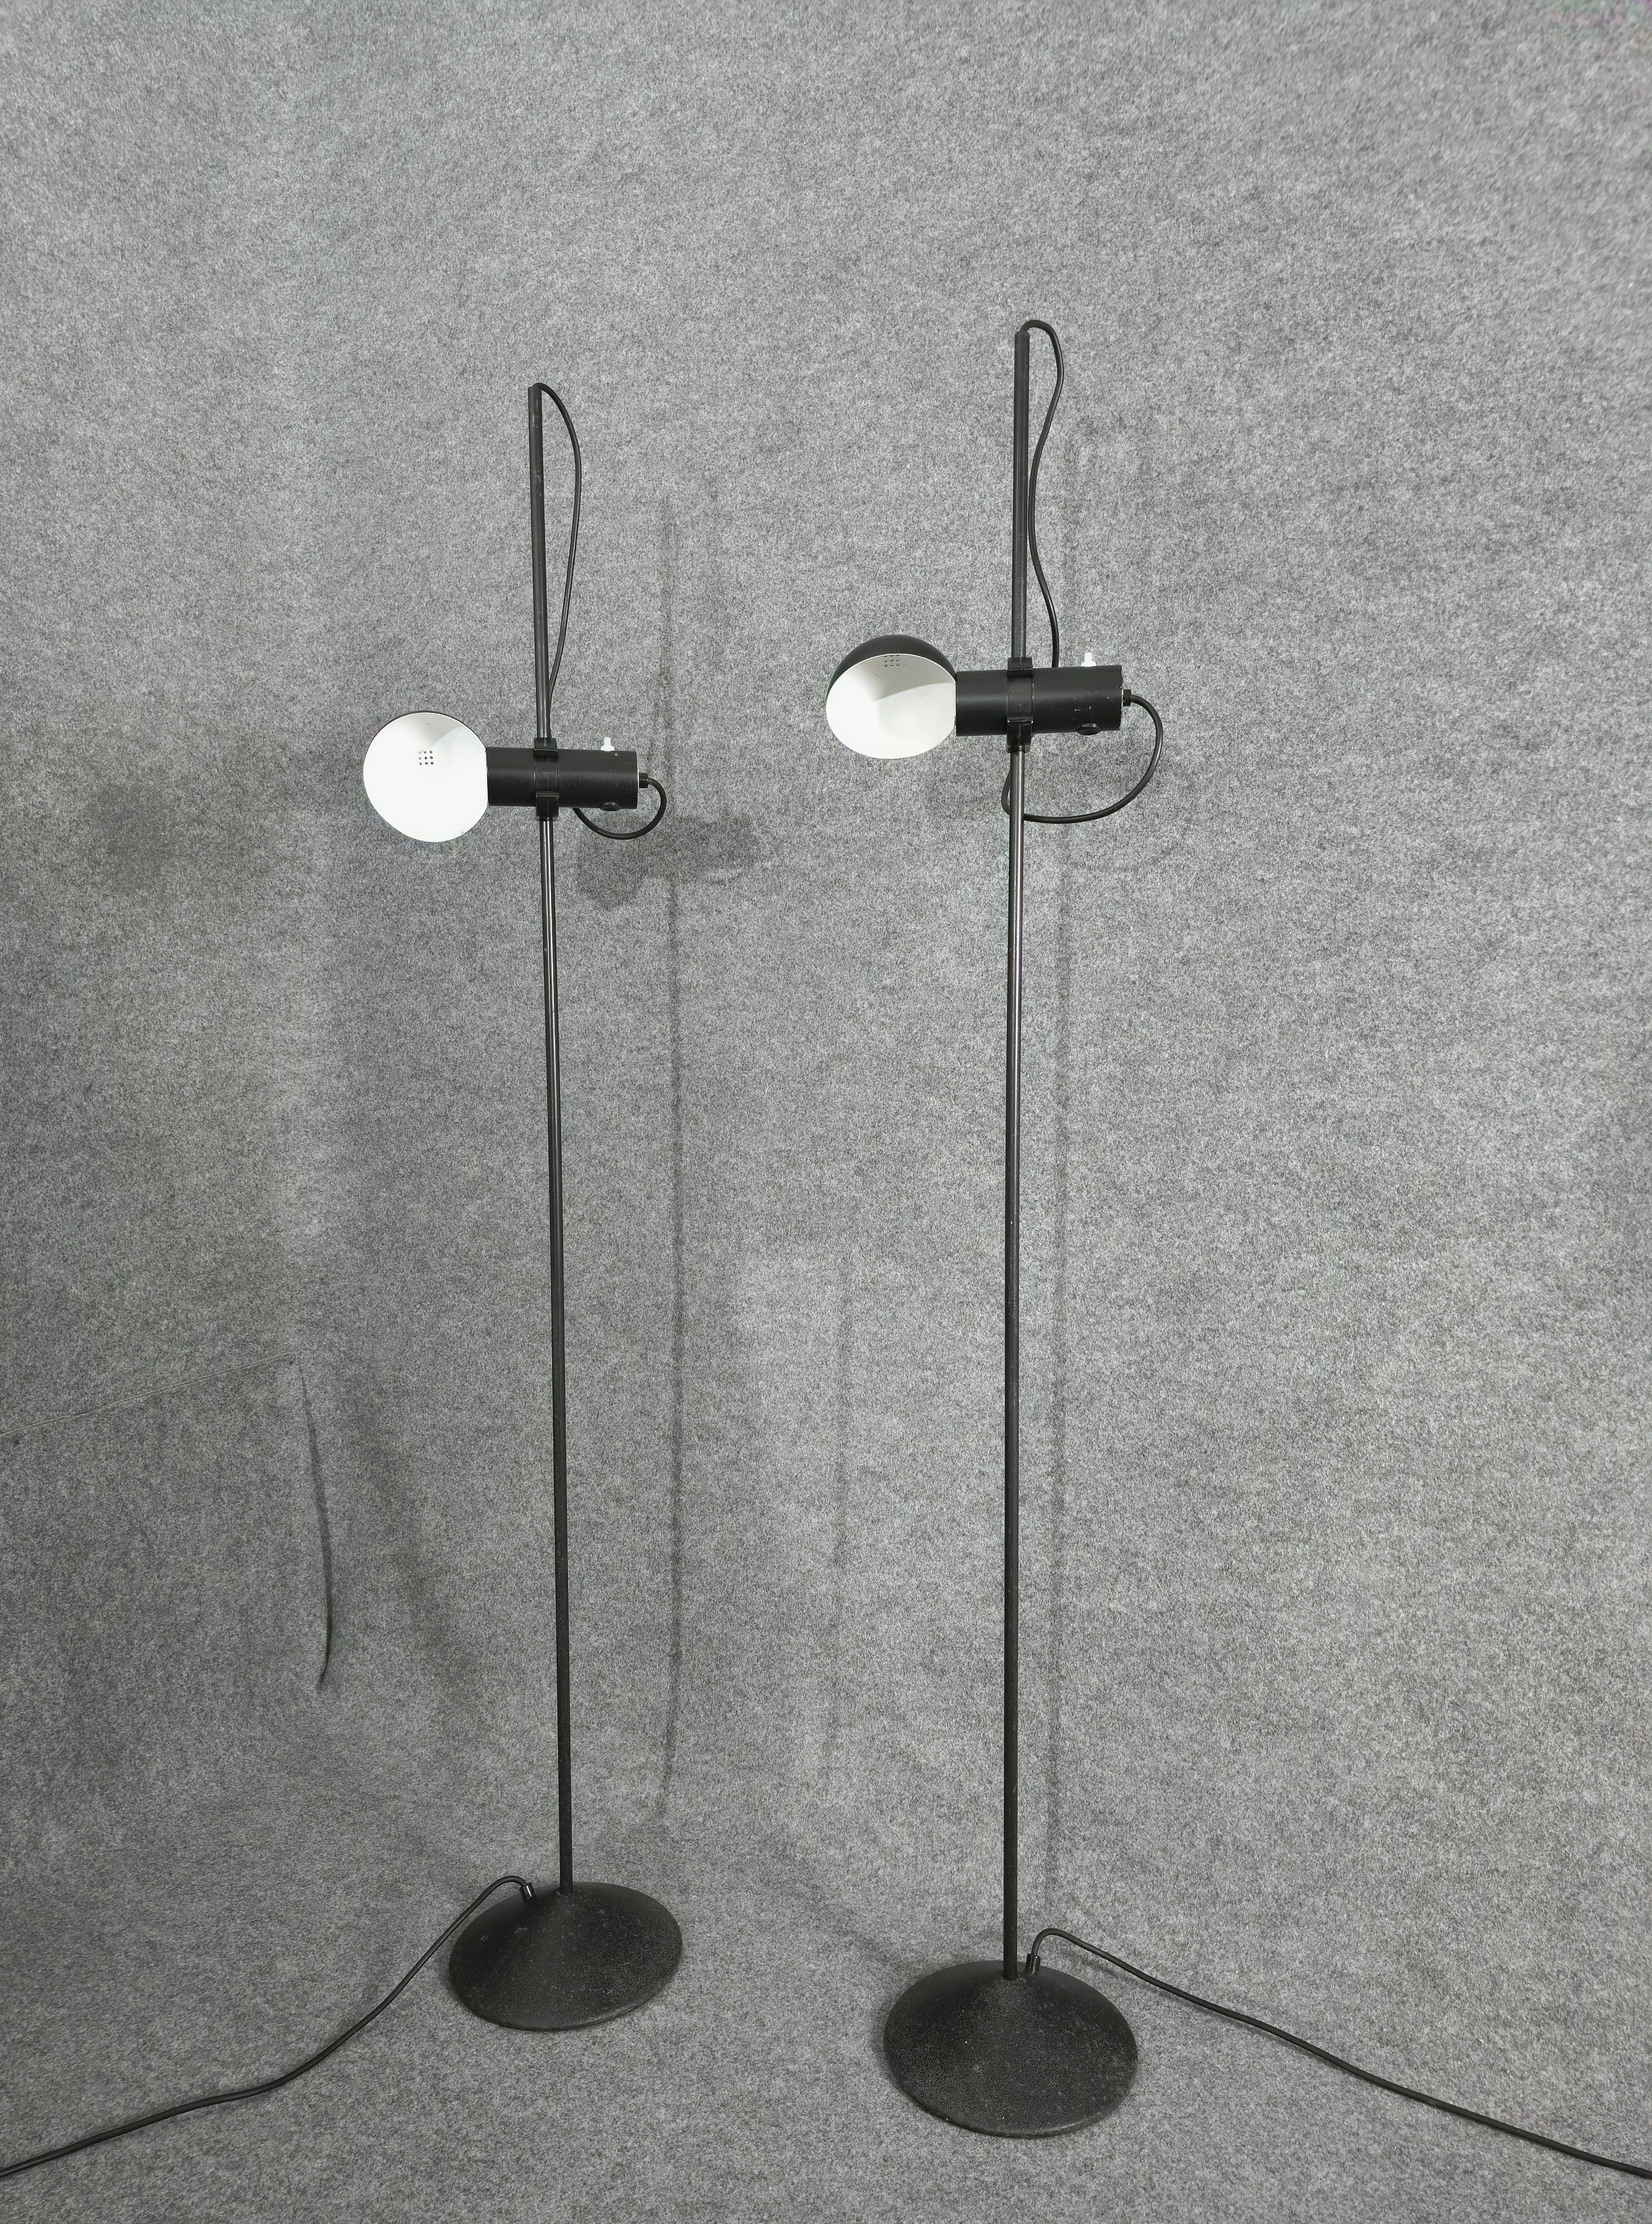 Two floor lamps produced in Italy 1960s. Black painted metal structure. Adjustable height, adjustable hemispherical diffuser, circular cone base.They keep every part in original. Perfectly functional.
Weight of 1 floor lamp: 4400Grammi
diffuser